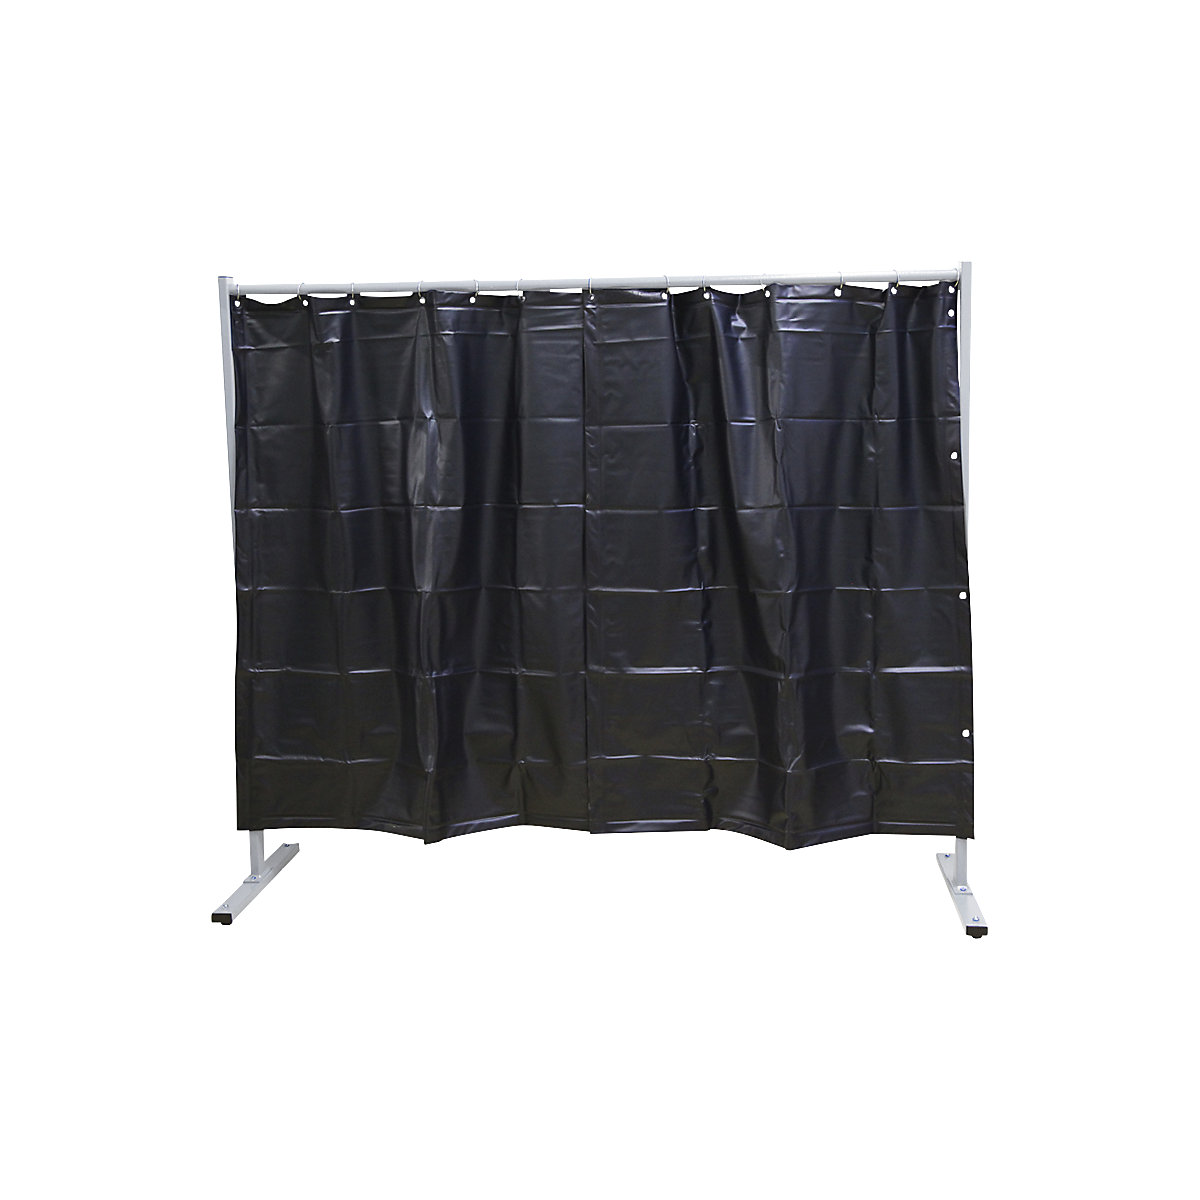 Mobile welding protection screen